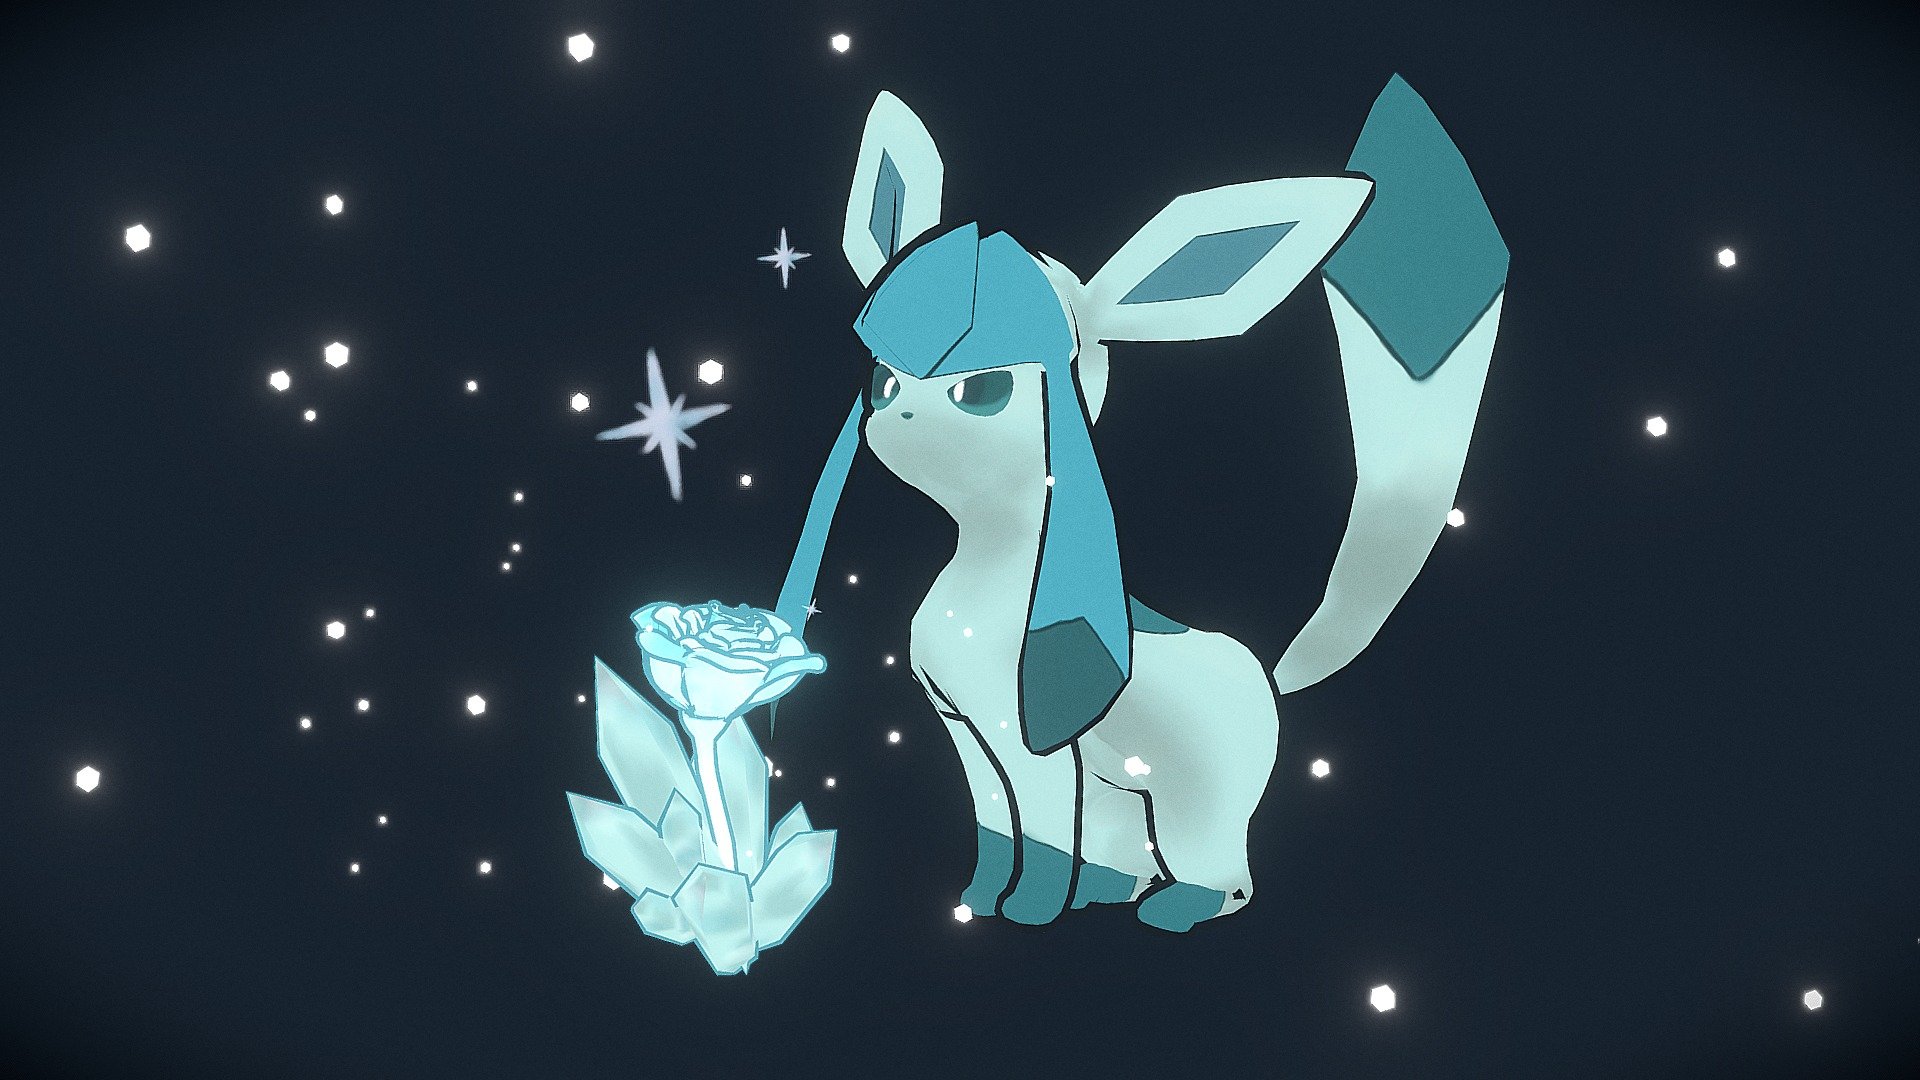 3D model of a Pokemon named Glaceon. Model has a rig and simple animation. Textures are handpainted and it has cellshading.

This is one of many Eevee evolutions in Pokemon 3d model